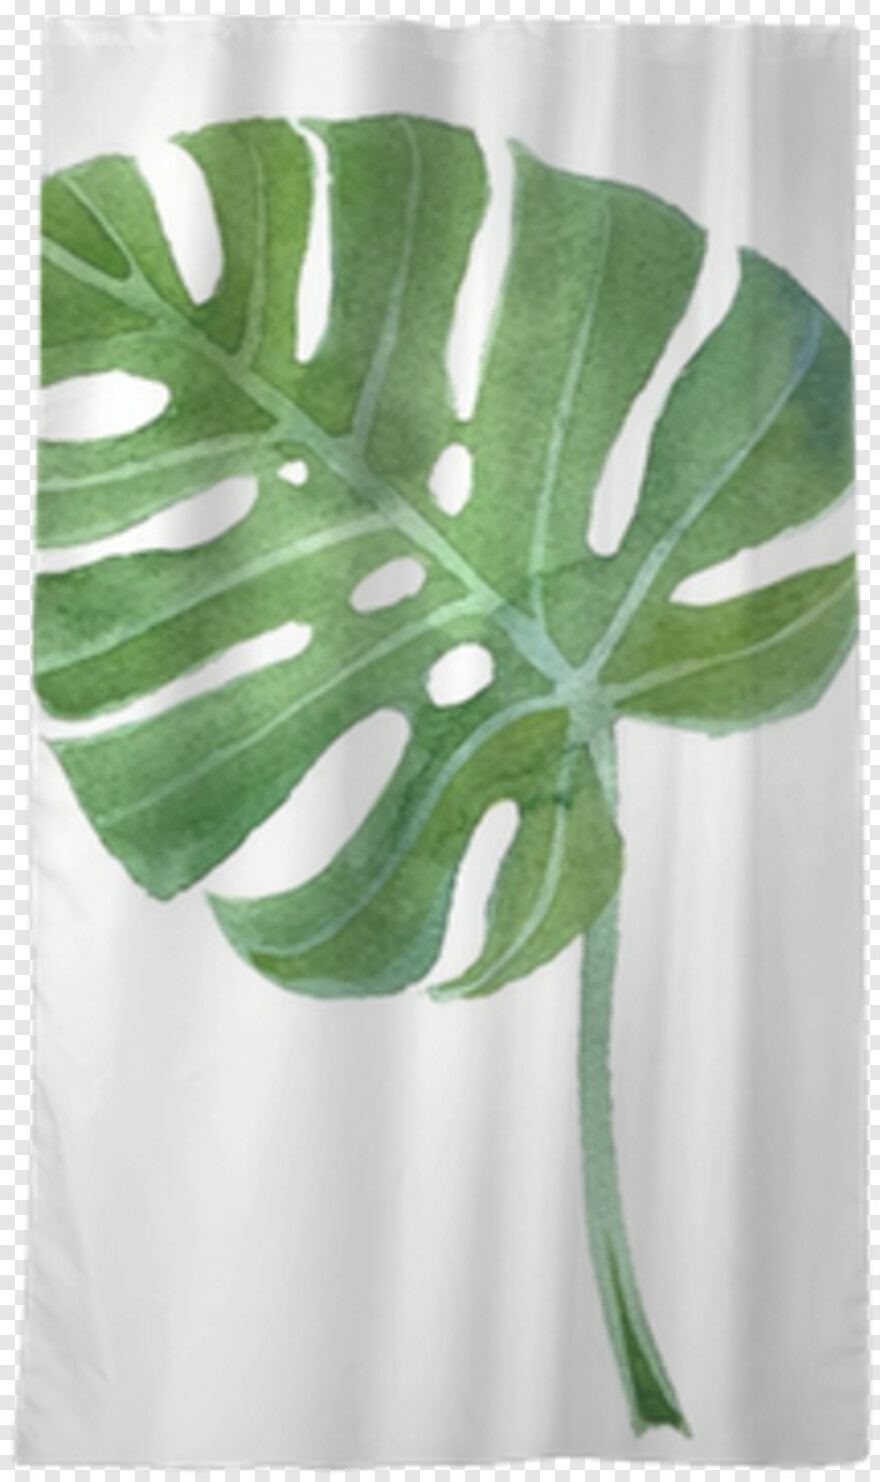 leaf-clipart # 1037696